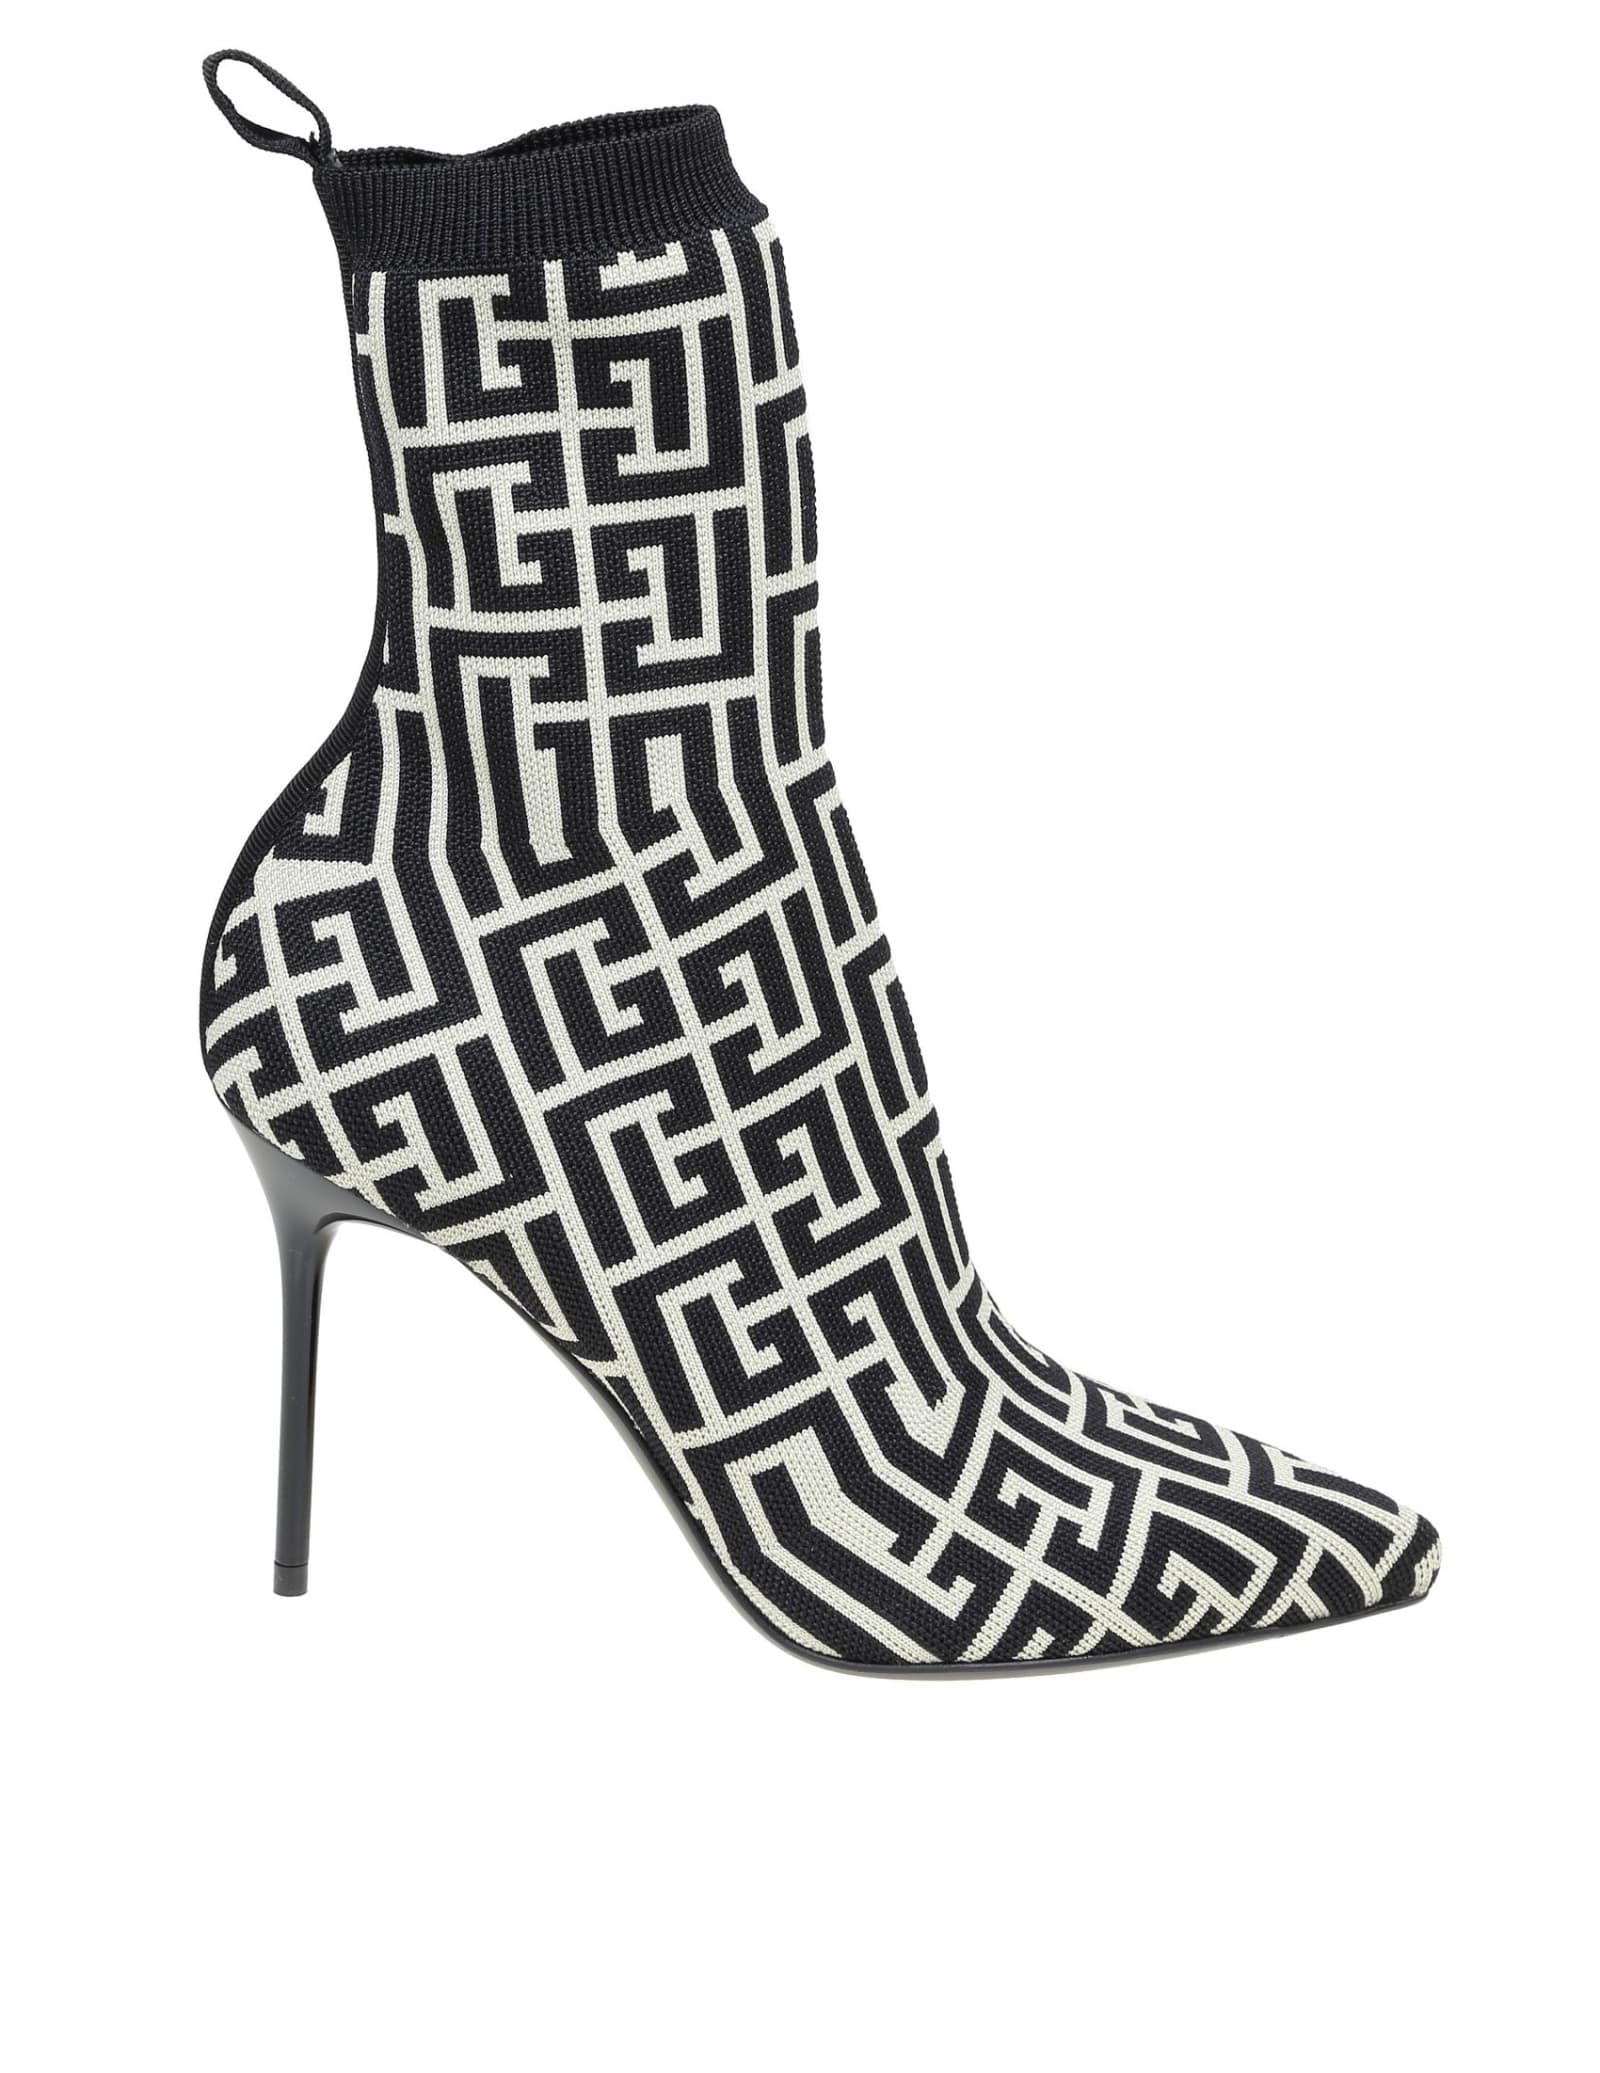 Buy Balmain Ankle Boots In Stretch Fabric With Monogram online, shop Balmain shoes with free shipping